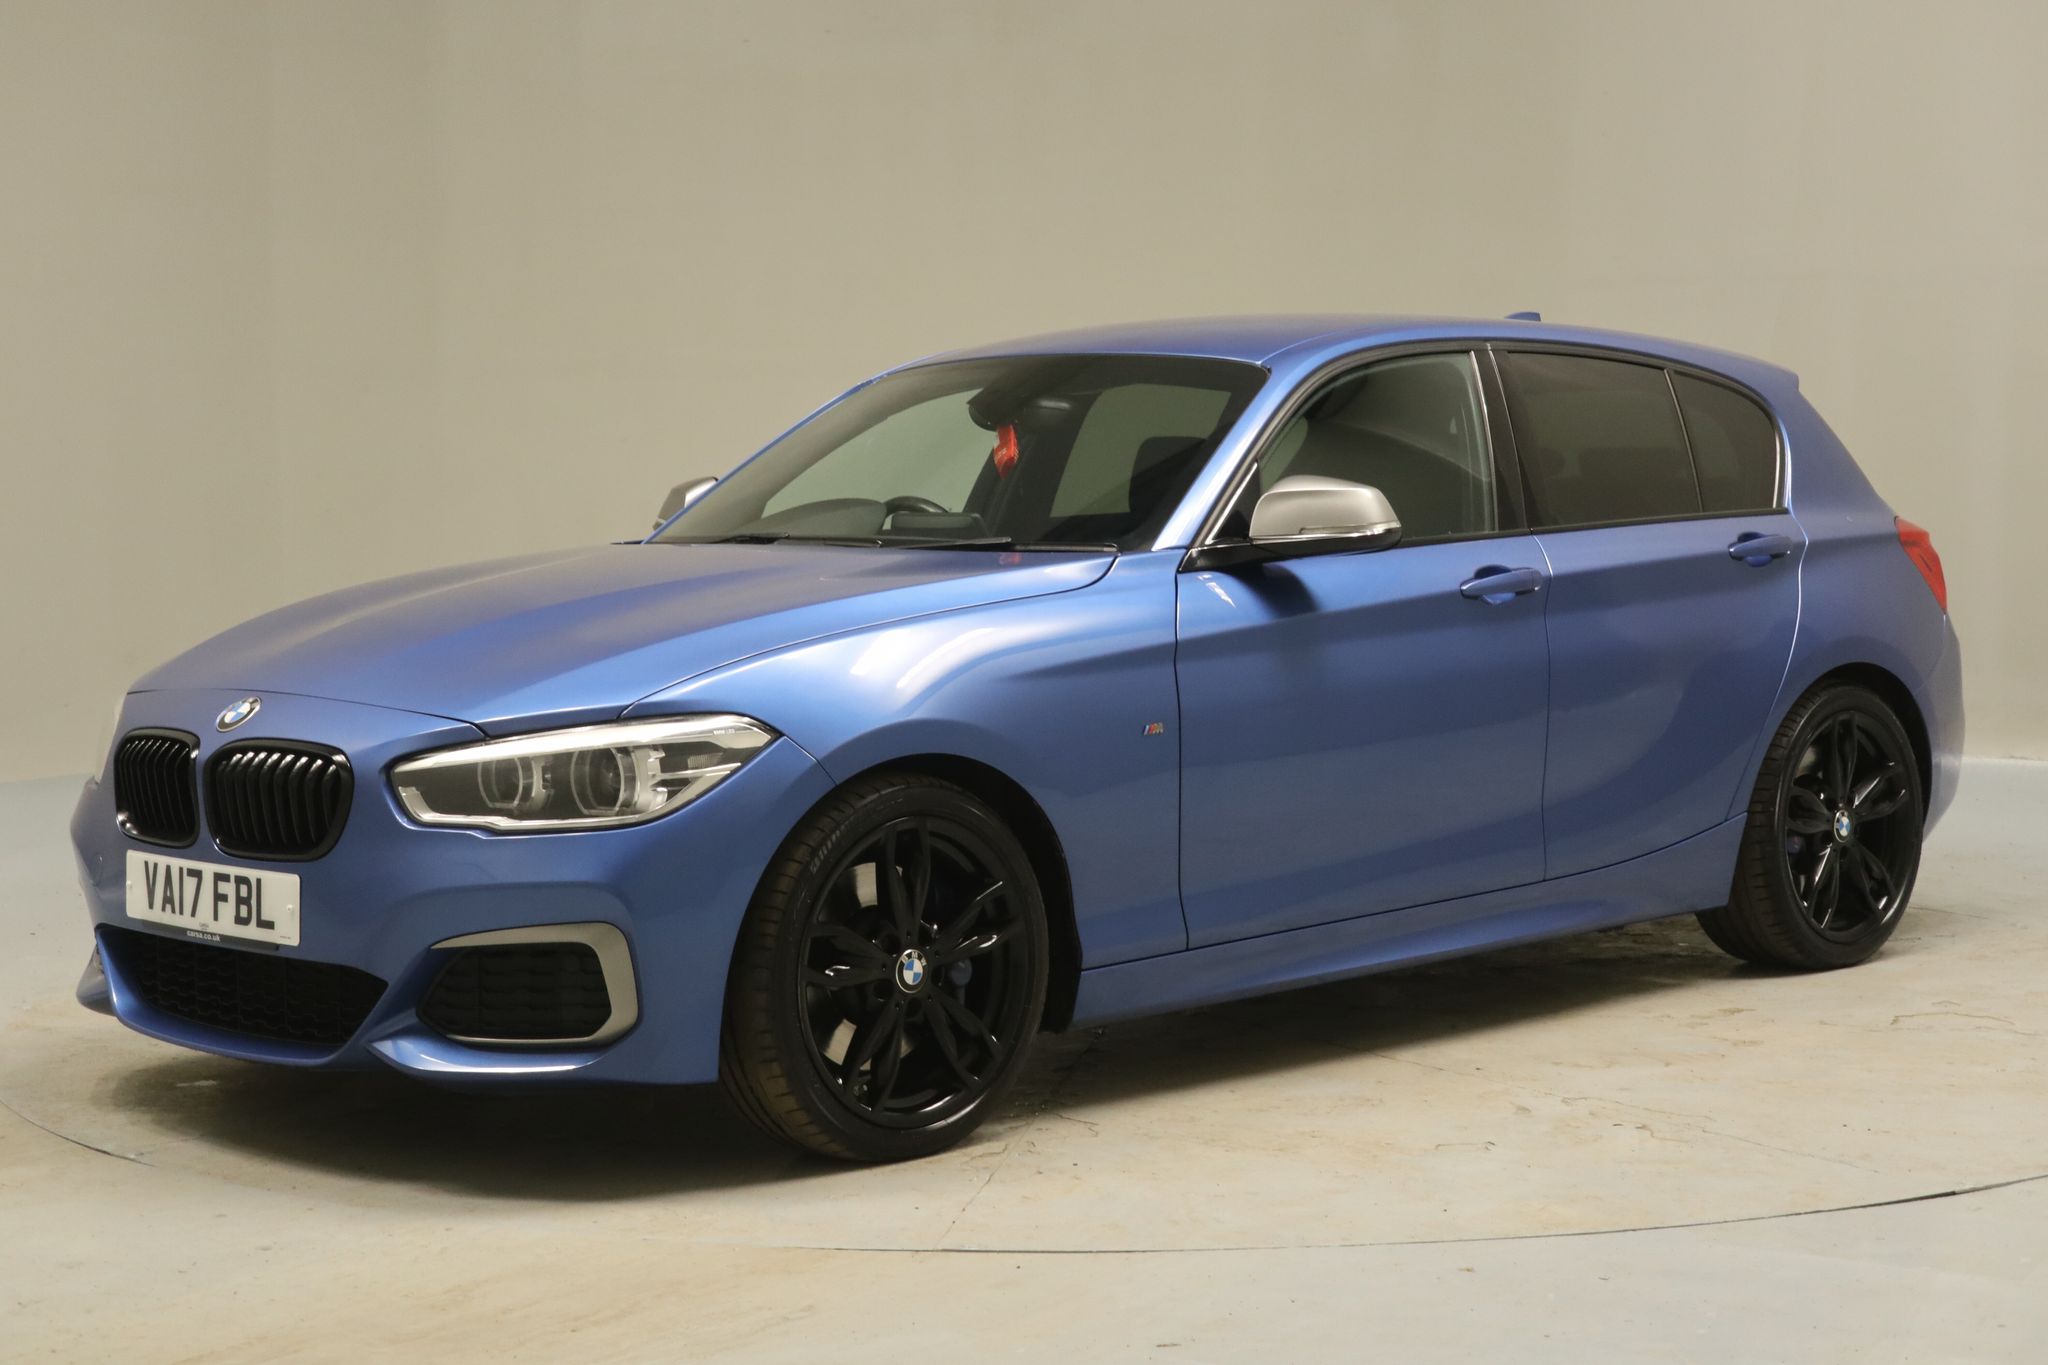 2017 used BMW 1 Series 3.0 M140i (340 ps)